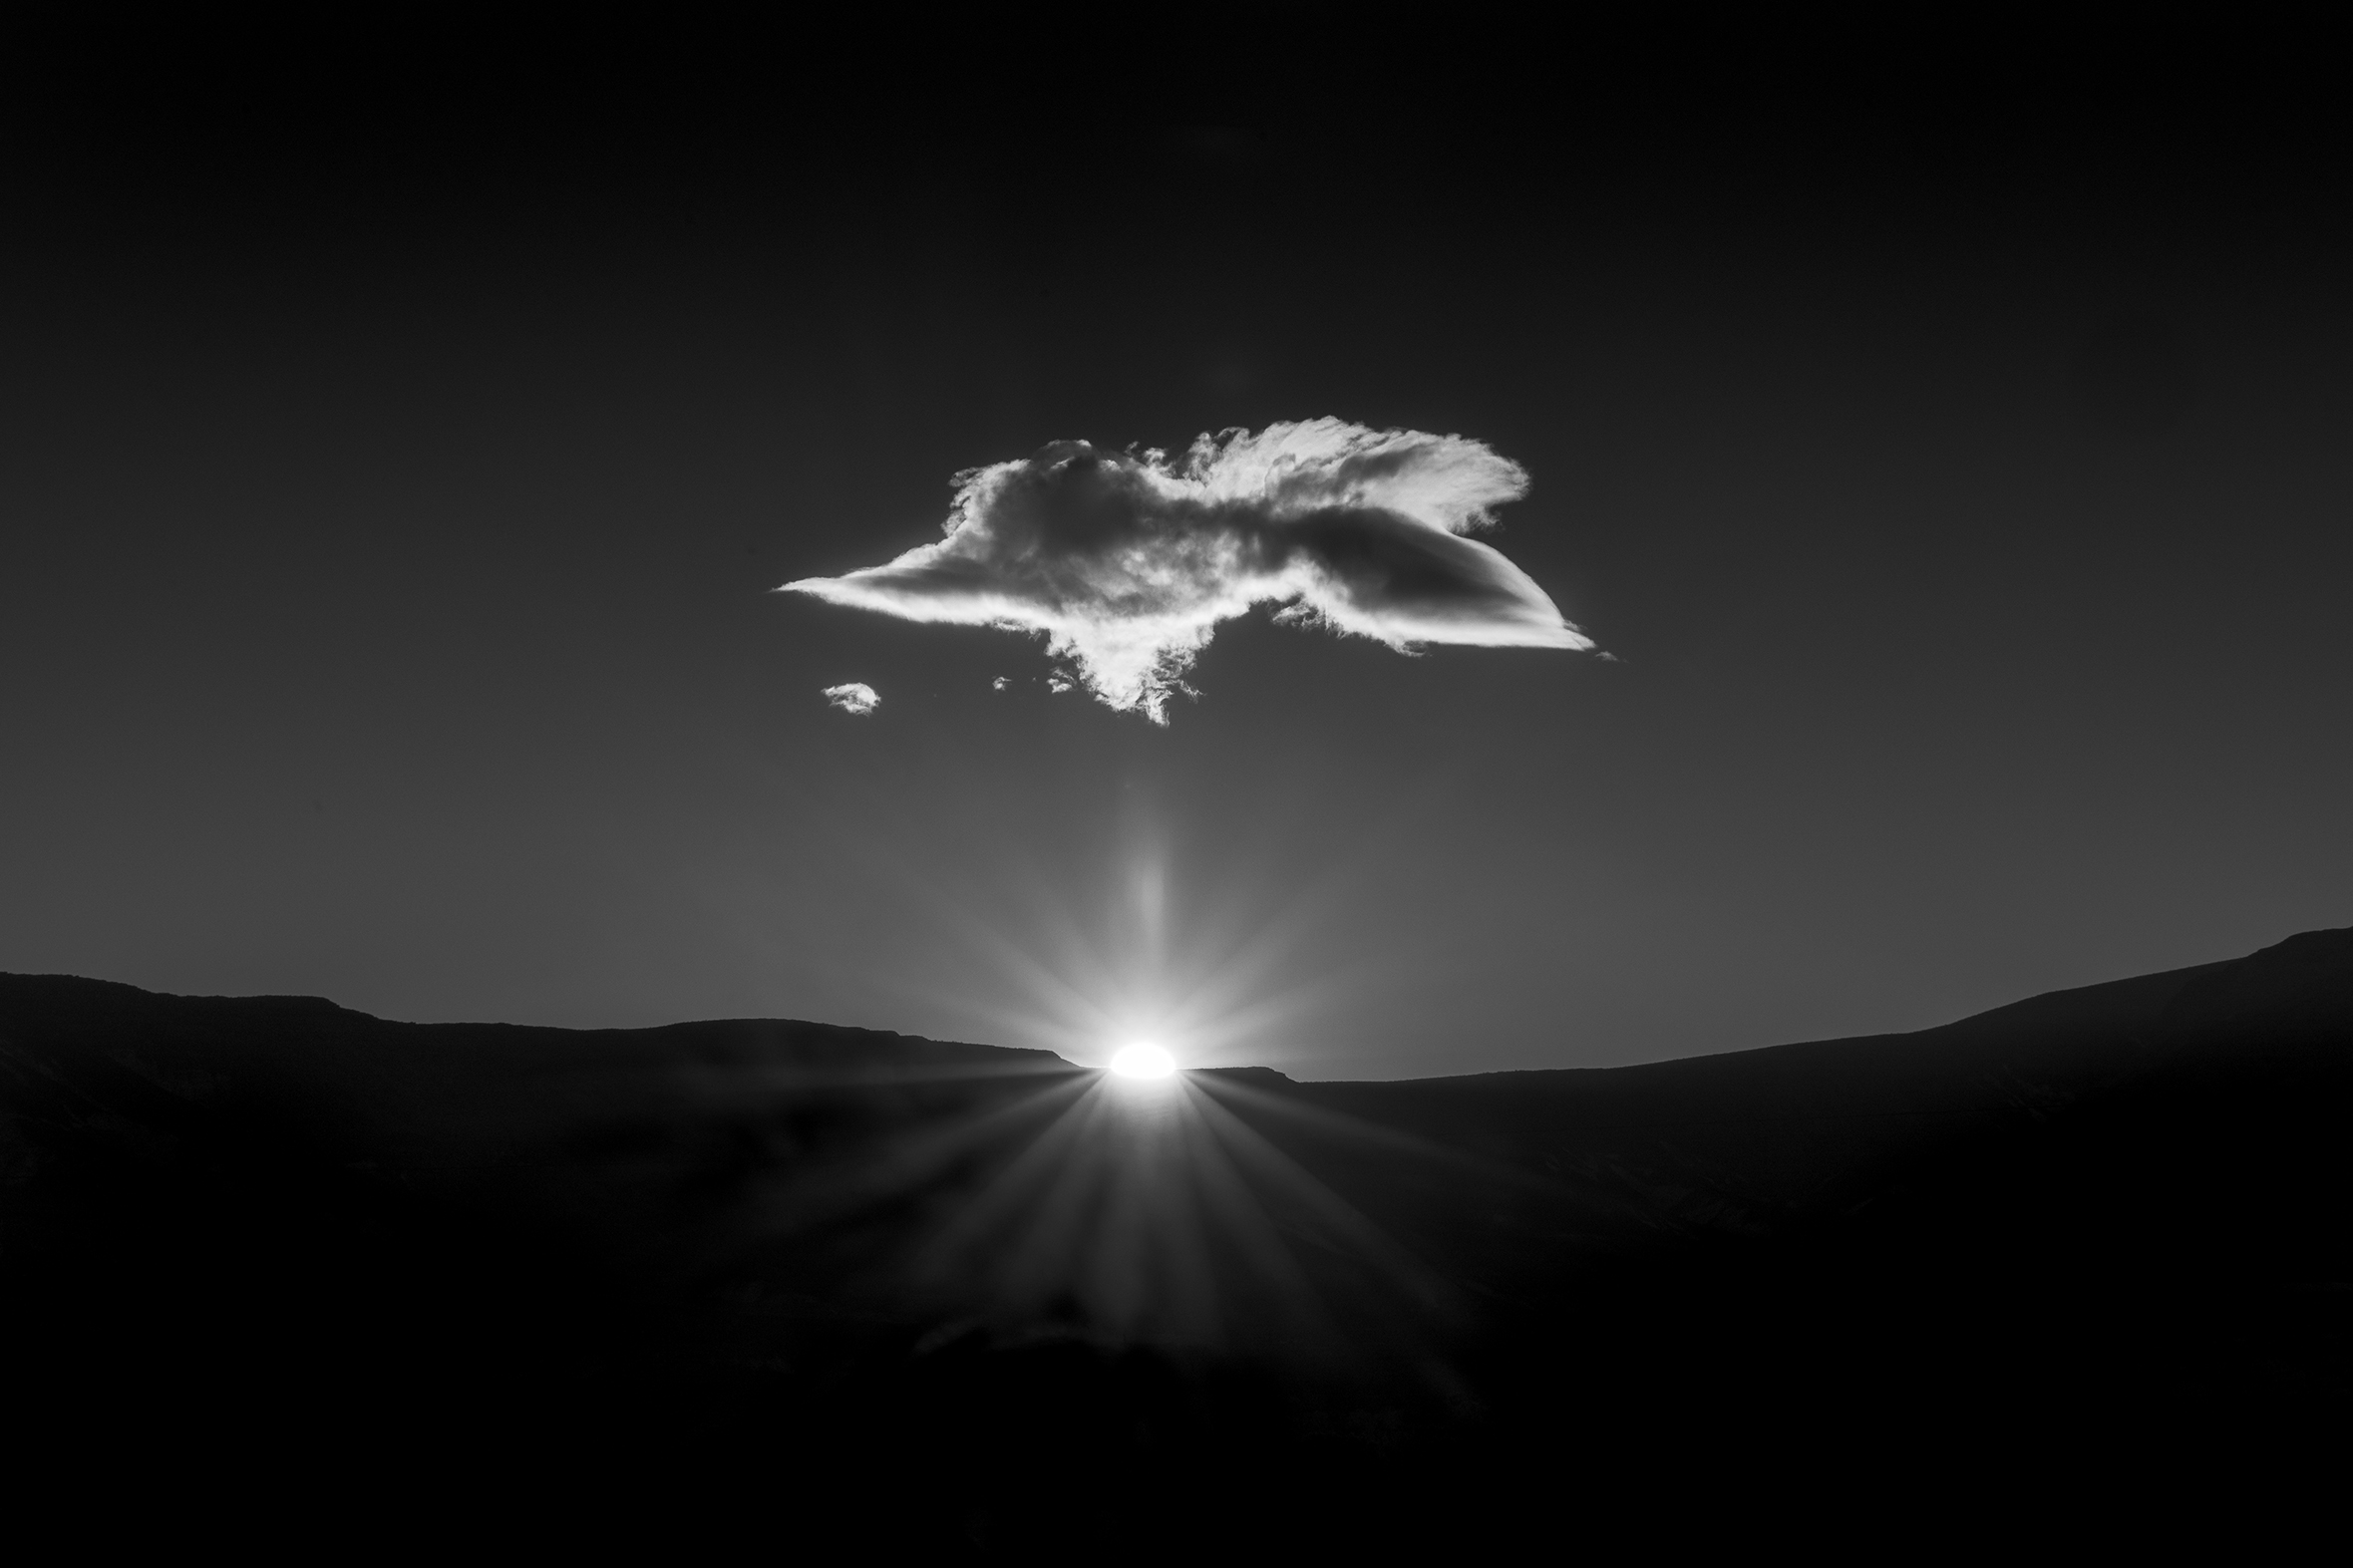 Bright sun with prominent rays rises up over a hilly, barren landscape with only one cloud in the sky which is perfectly positioned and illuminated directly above the sun.